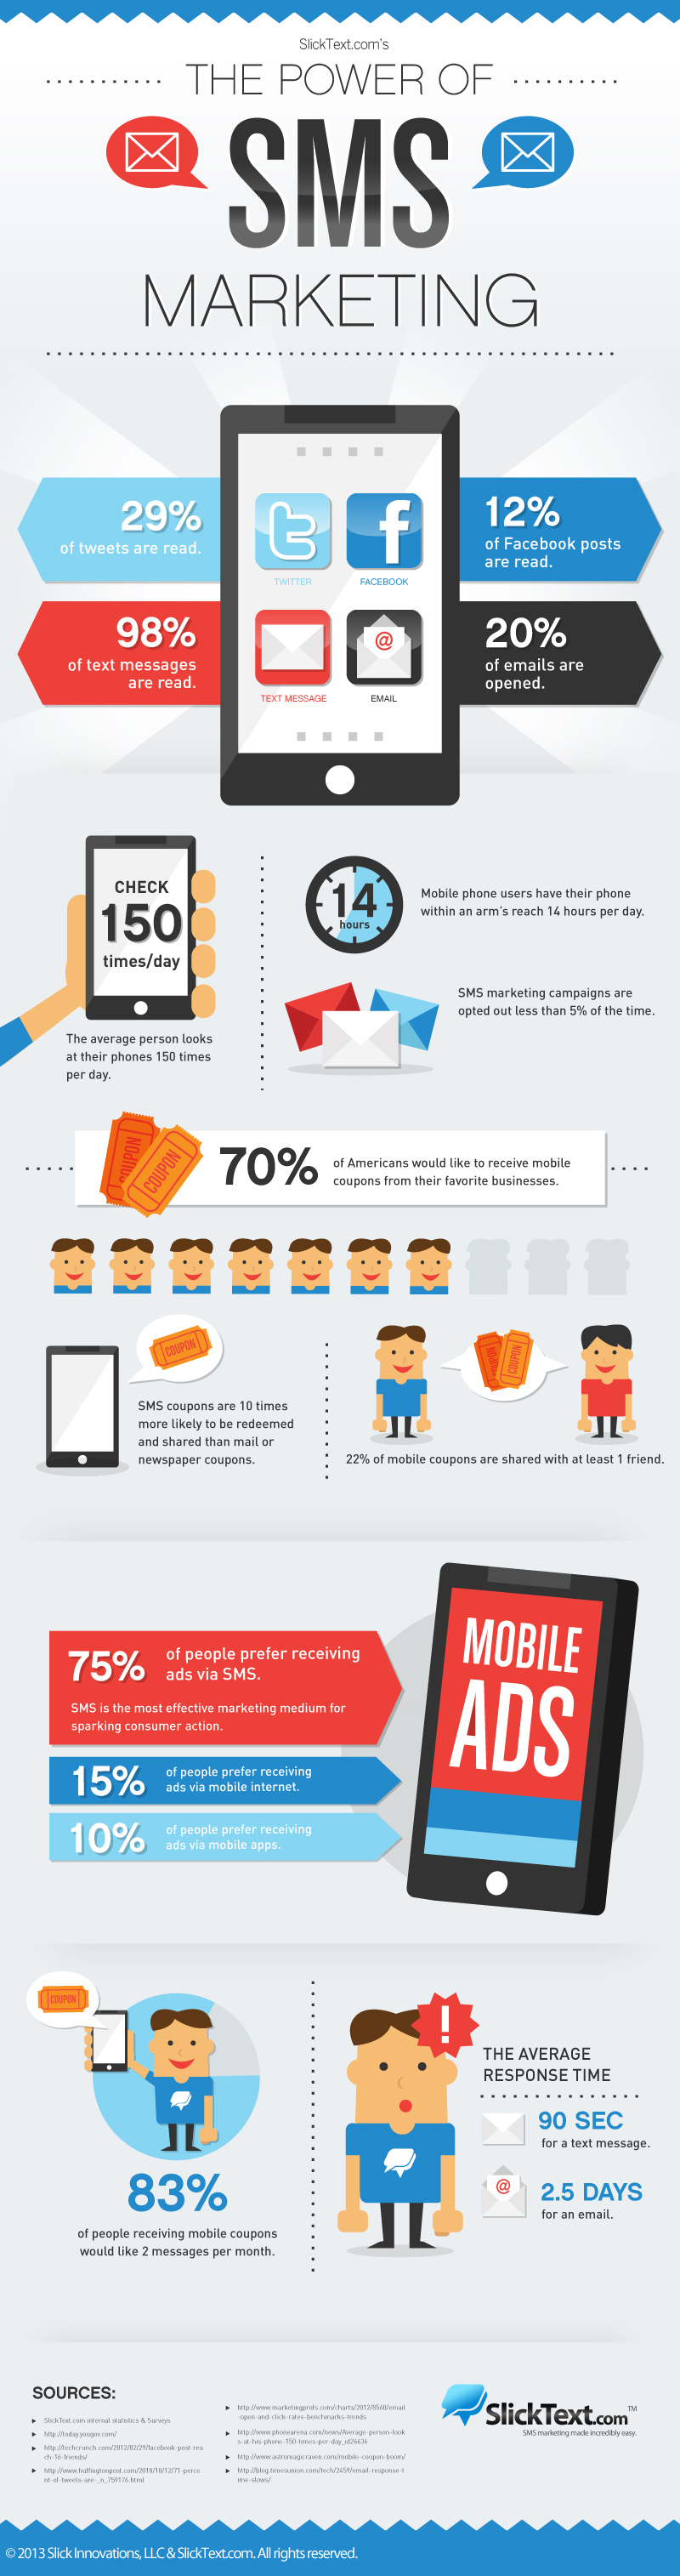 sms-marketing-infographic1